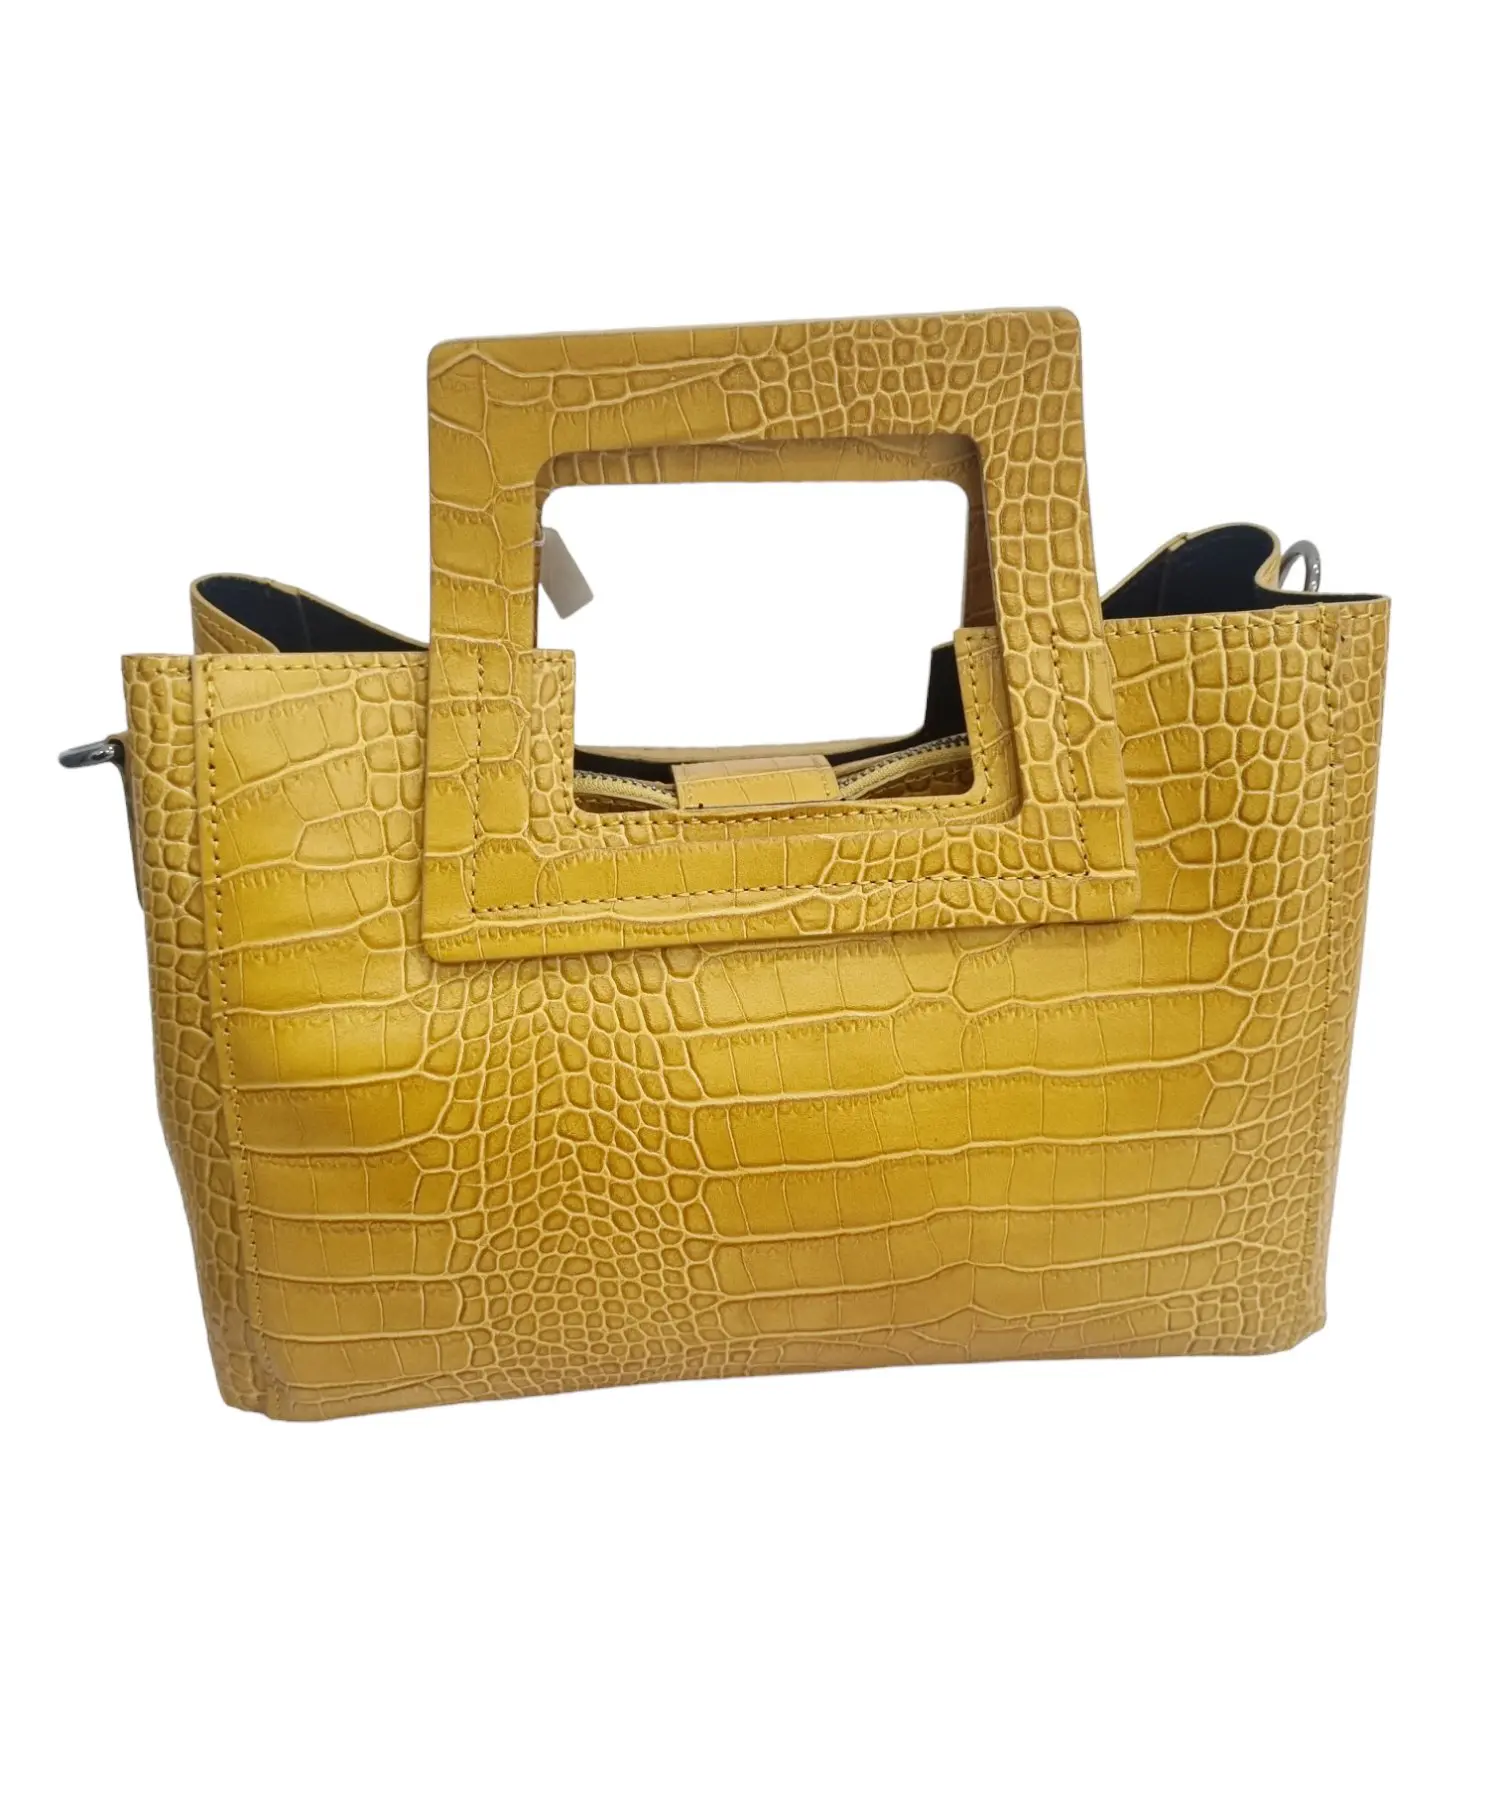 Genuine leather bag, made in Italy, ocher yellow colour, equipped with shoulder strap, three internal compartments with side pockets, removable central bag. closure with magnetic button. Square handle. Measurements L30 B11 H18